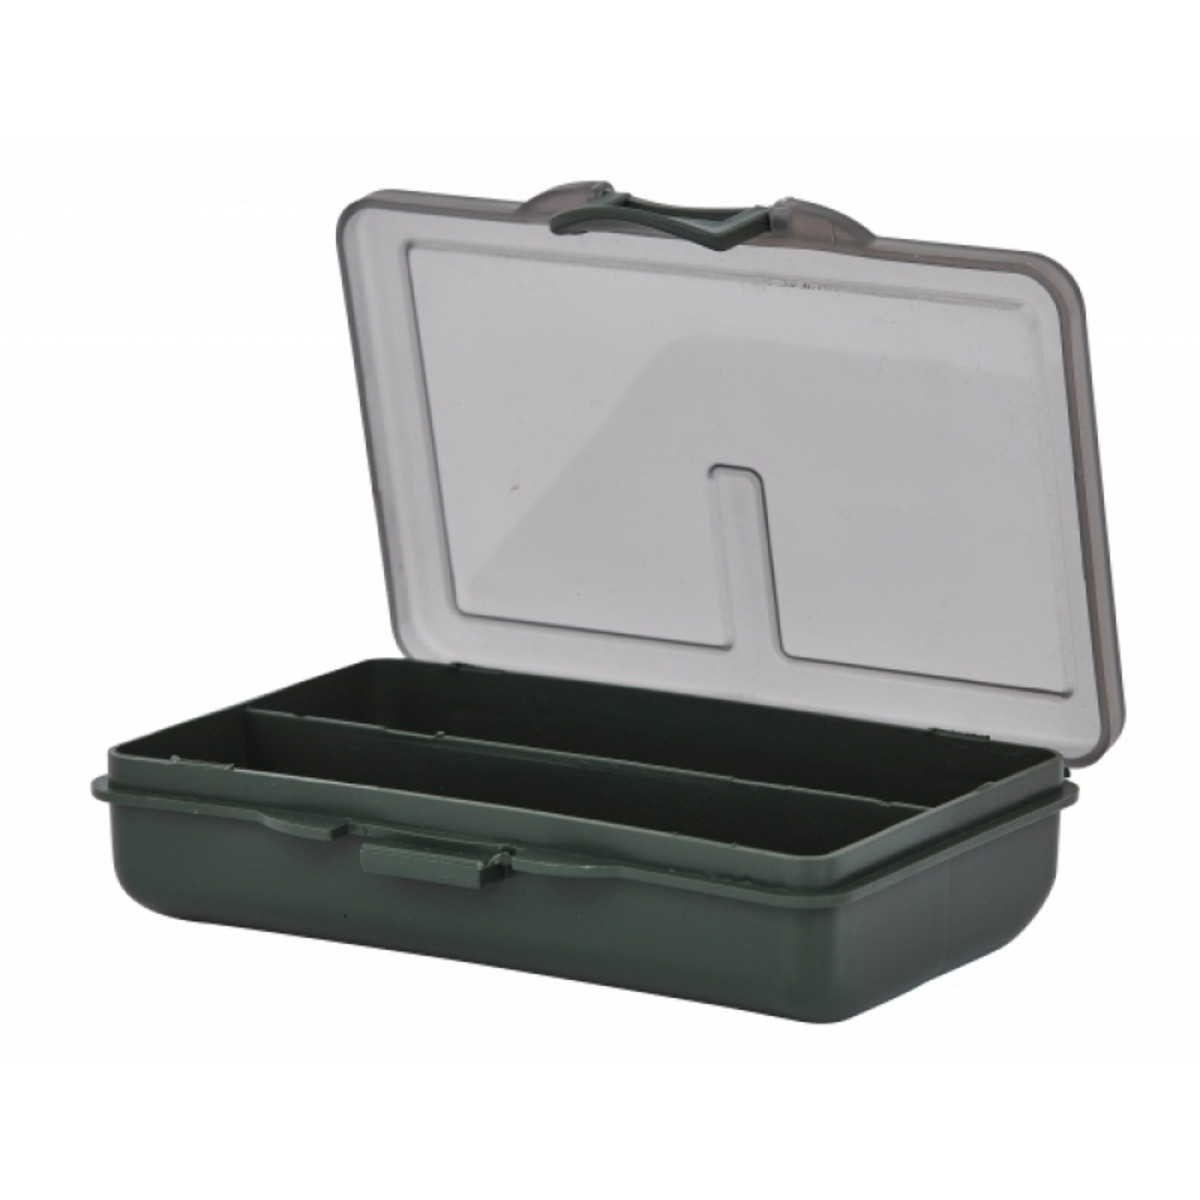 Starbaits Session Small Box - 2 Compartments         